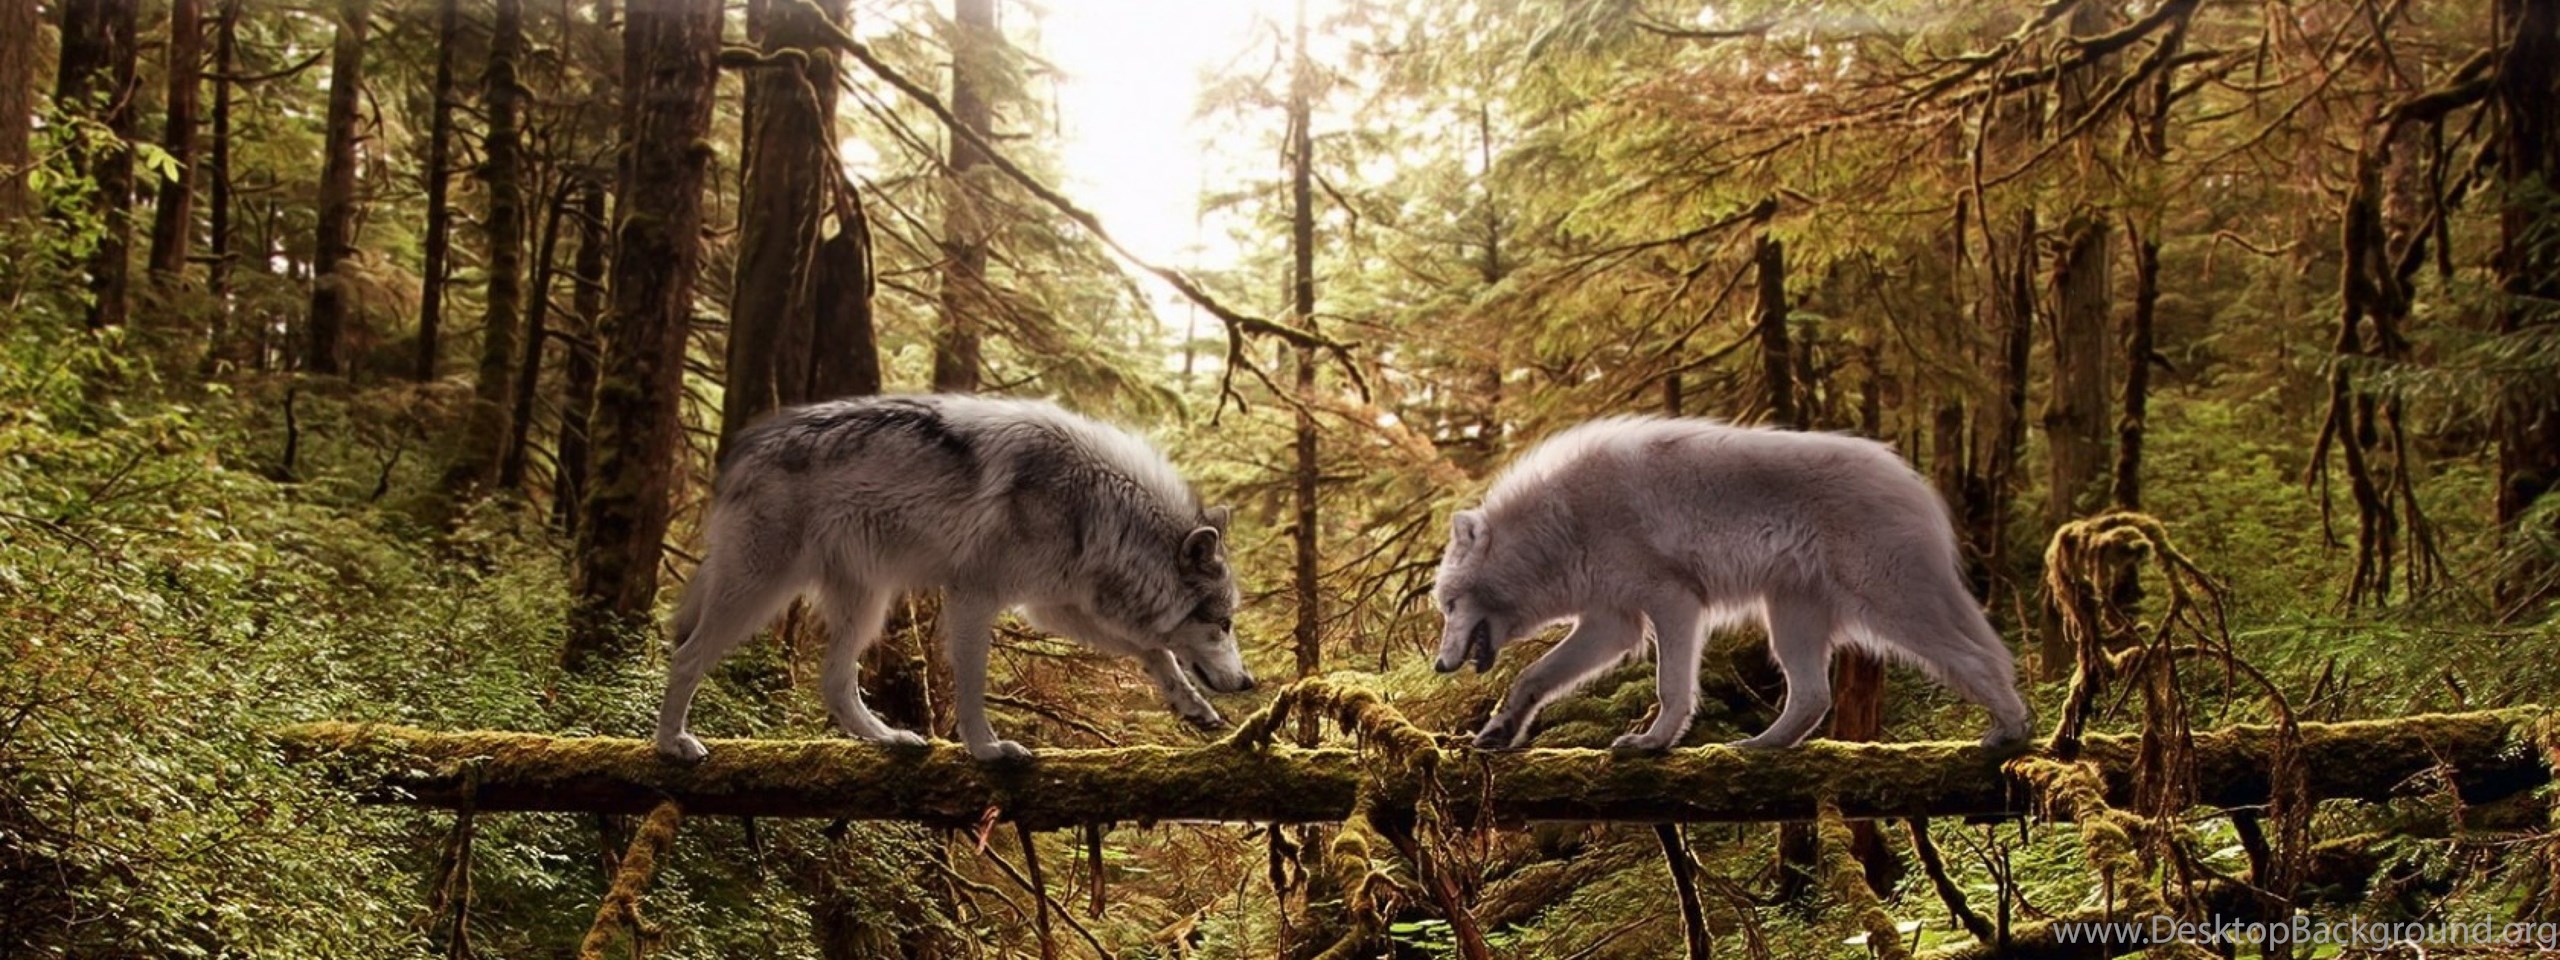 https://www.desktopbackground.org/download/2560x960/2014/06/20/781267_download-wallpapers-3840x2400-wolves-couple-forest-trees-trunk_3840x2400_h.jpg